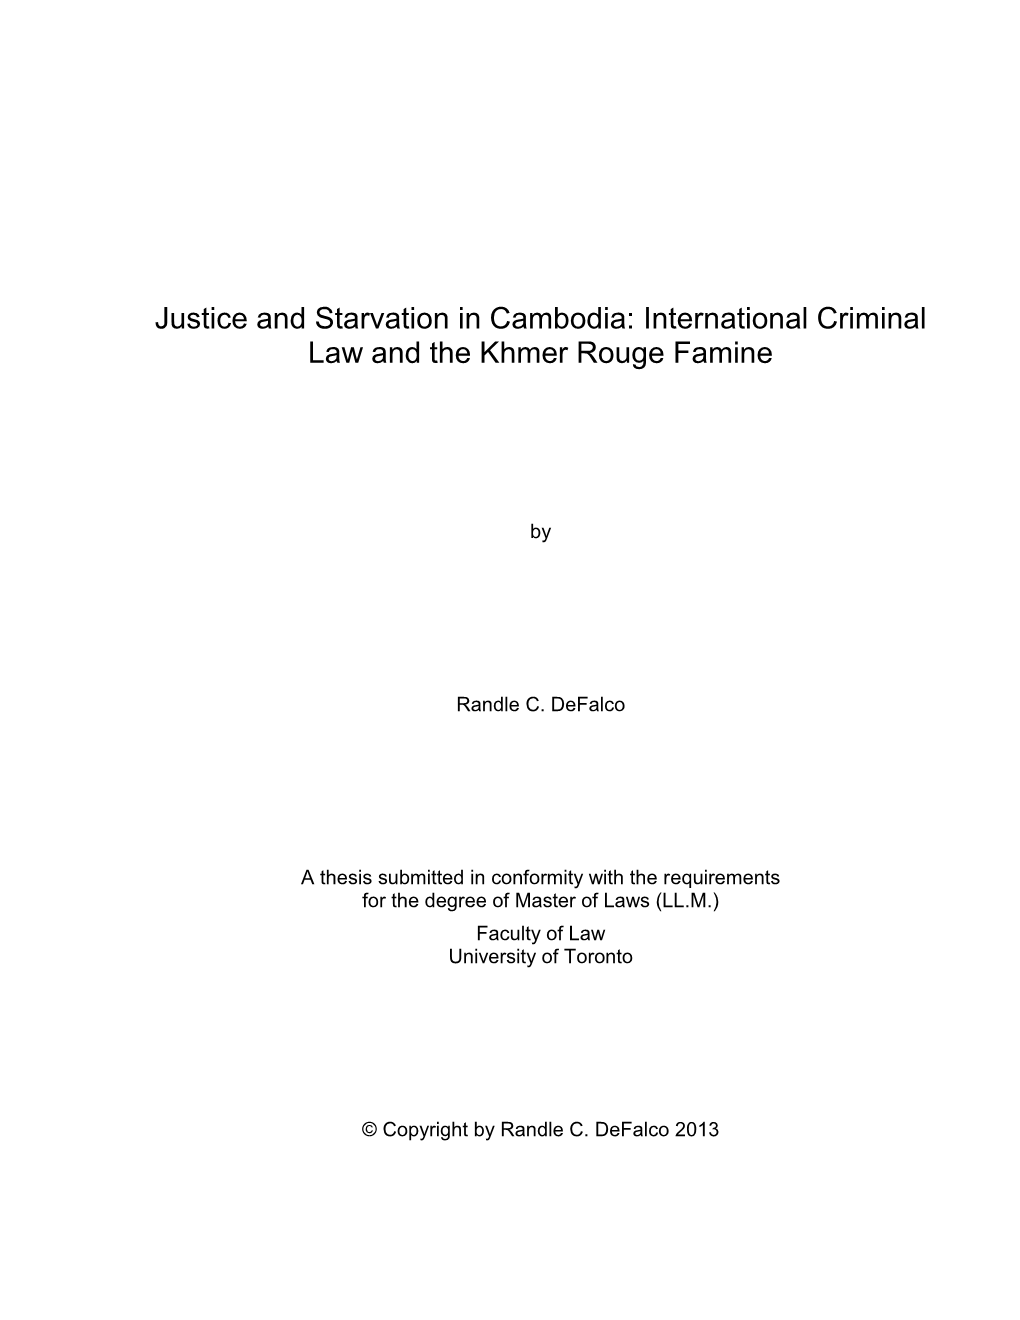 Justice and Starvation in Cambodia: International Criminal Law and the Khmer Rouge Famine